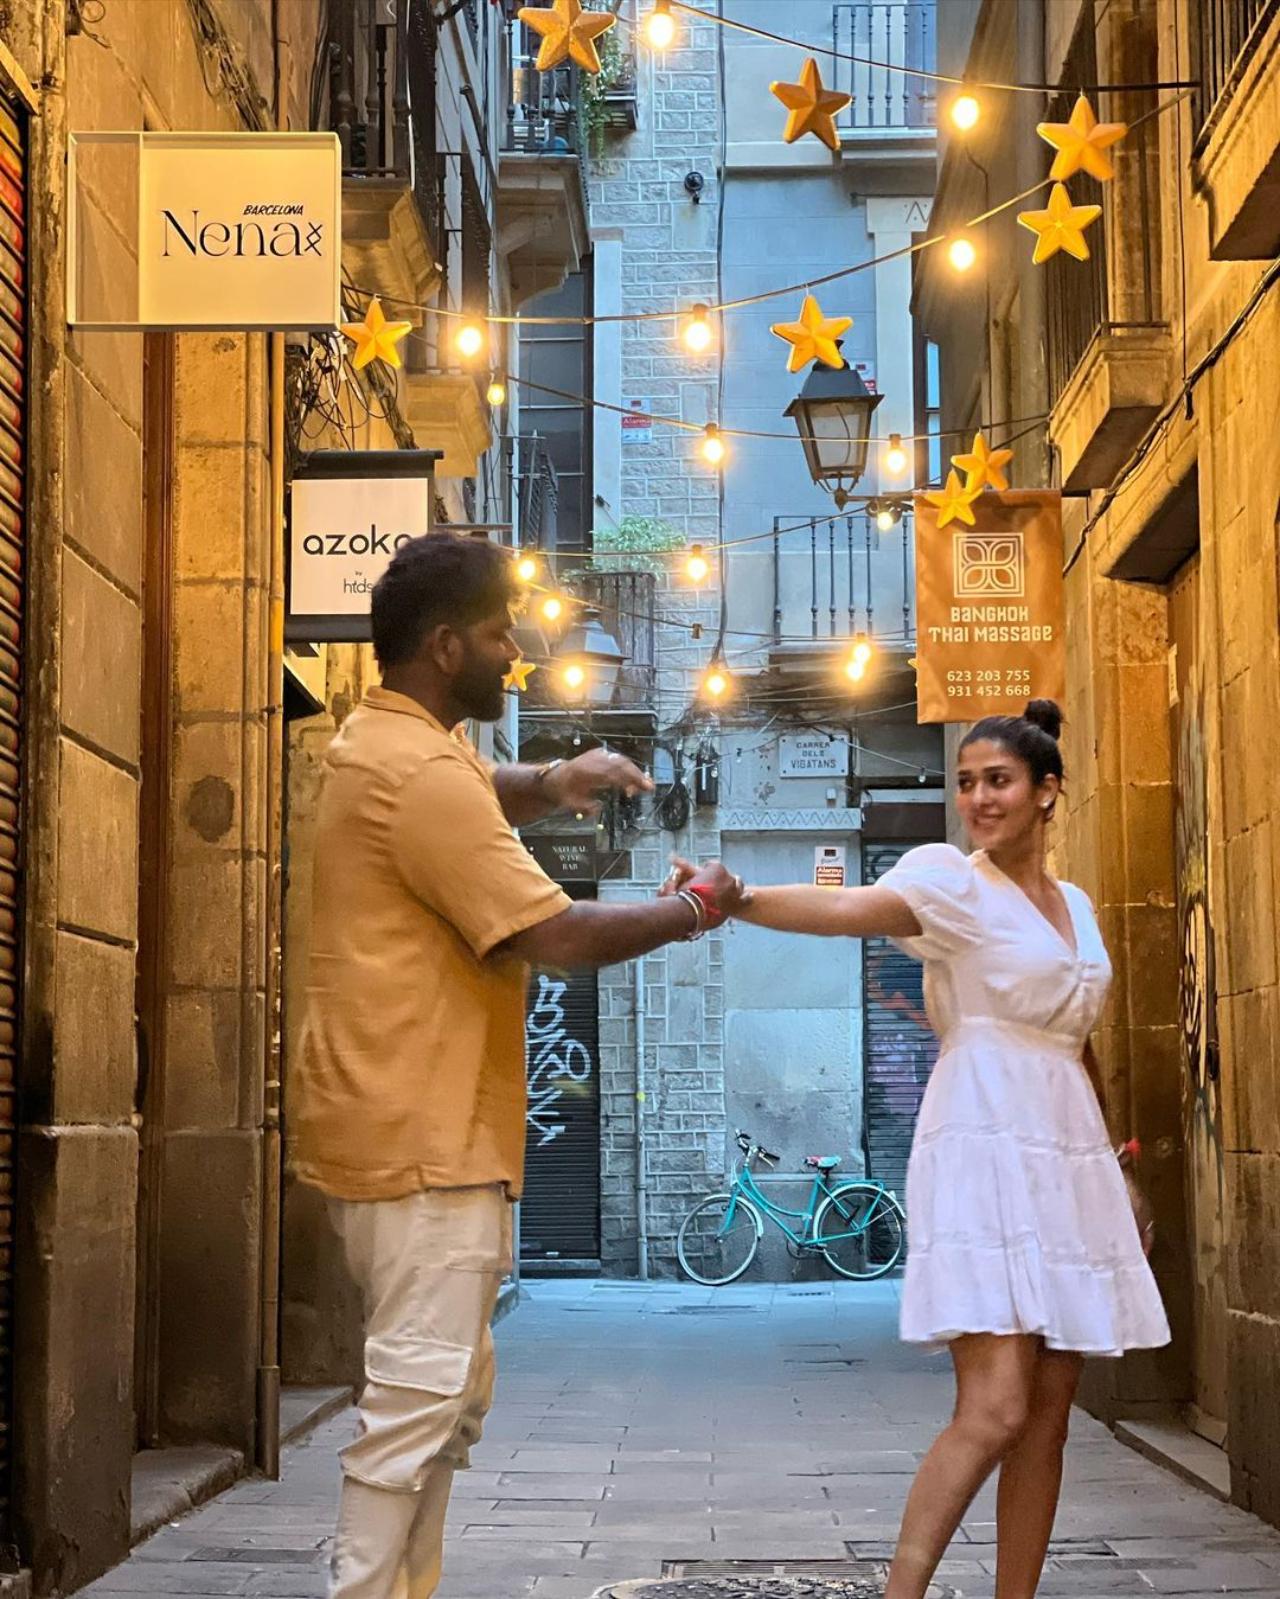 Vignesh and Nayanthara got married in June this year. Their wedding video will be streamed exclusively on Netflix soon